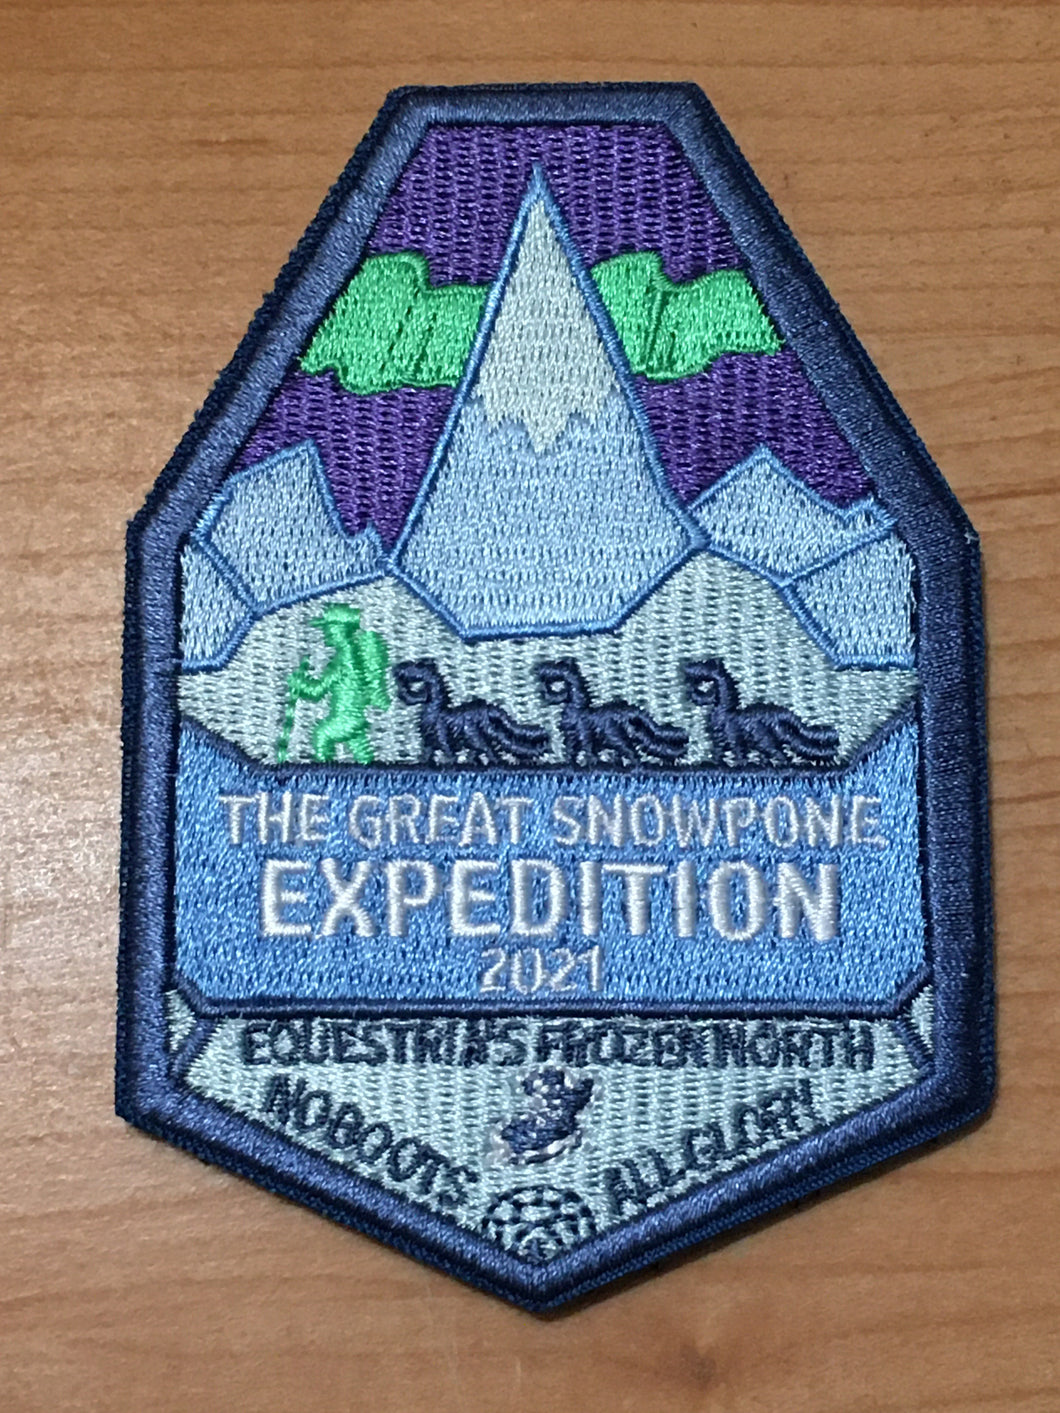 The Great Snowpone Expedition Patch